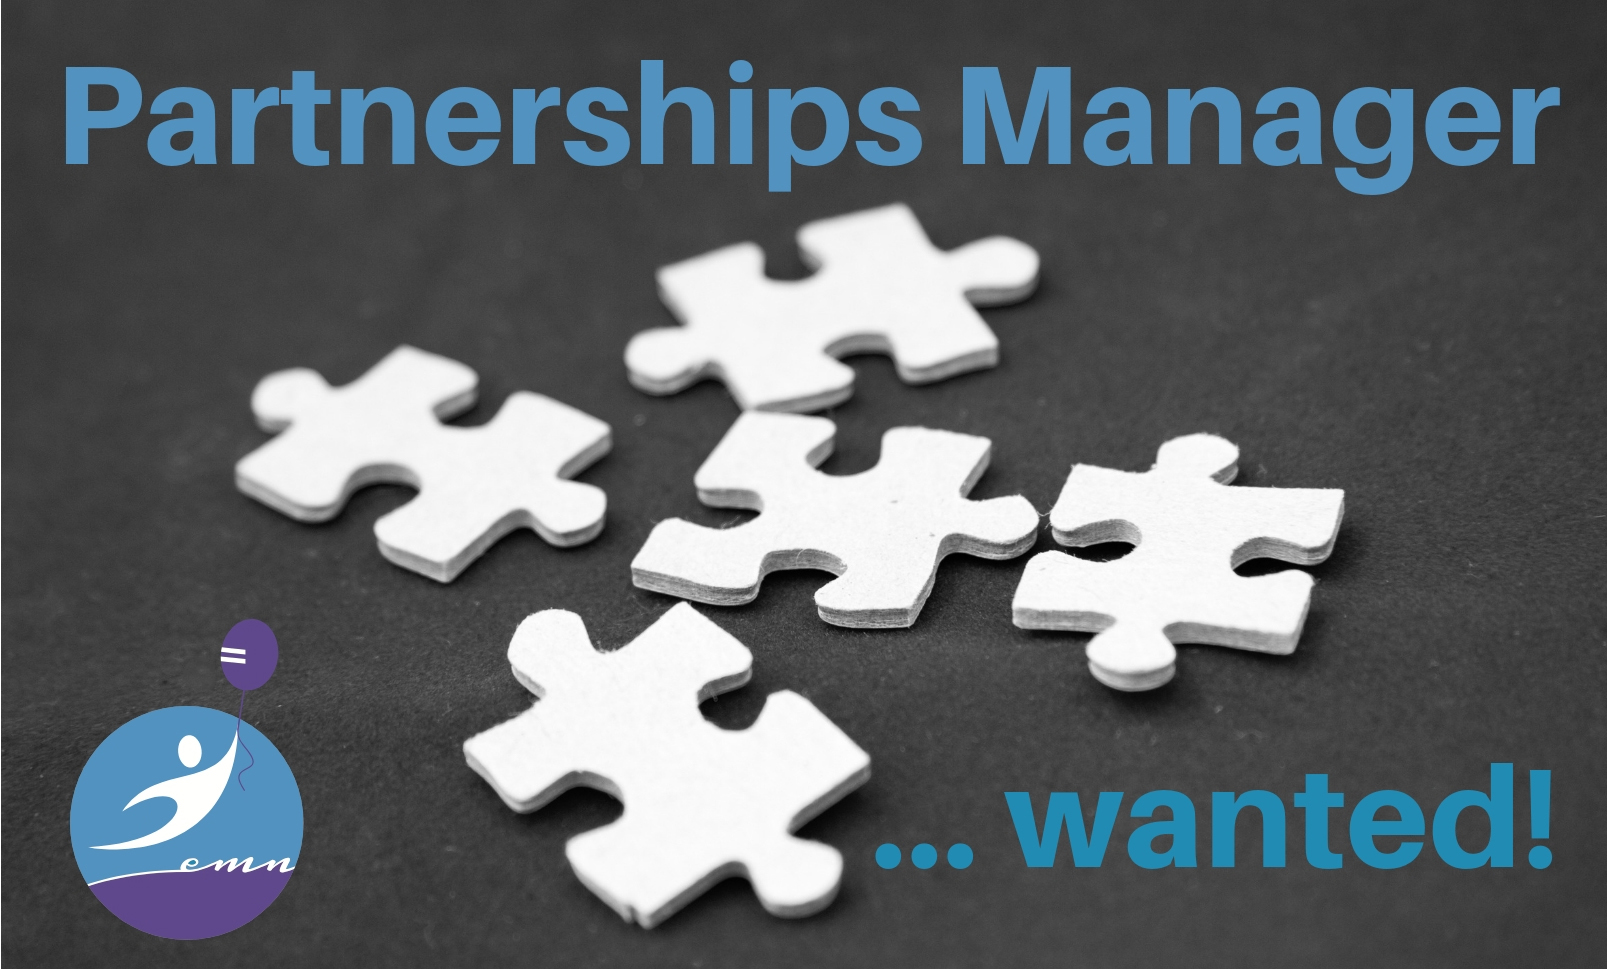 EMN is looking for Partnerships Manager